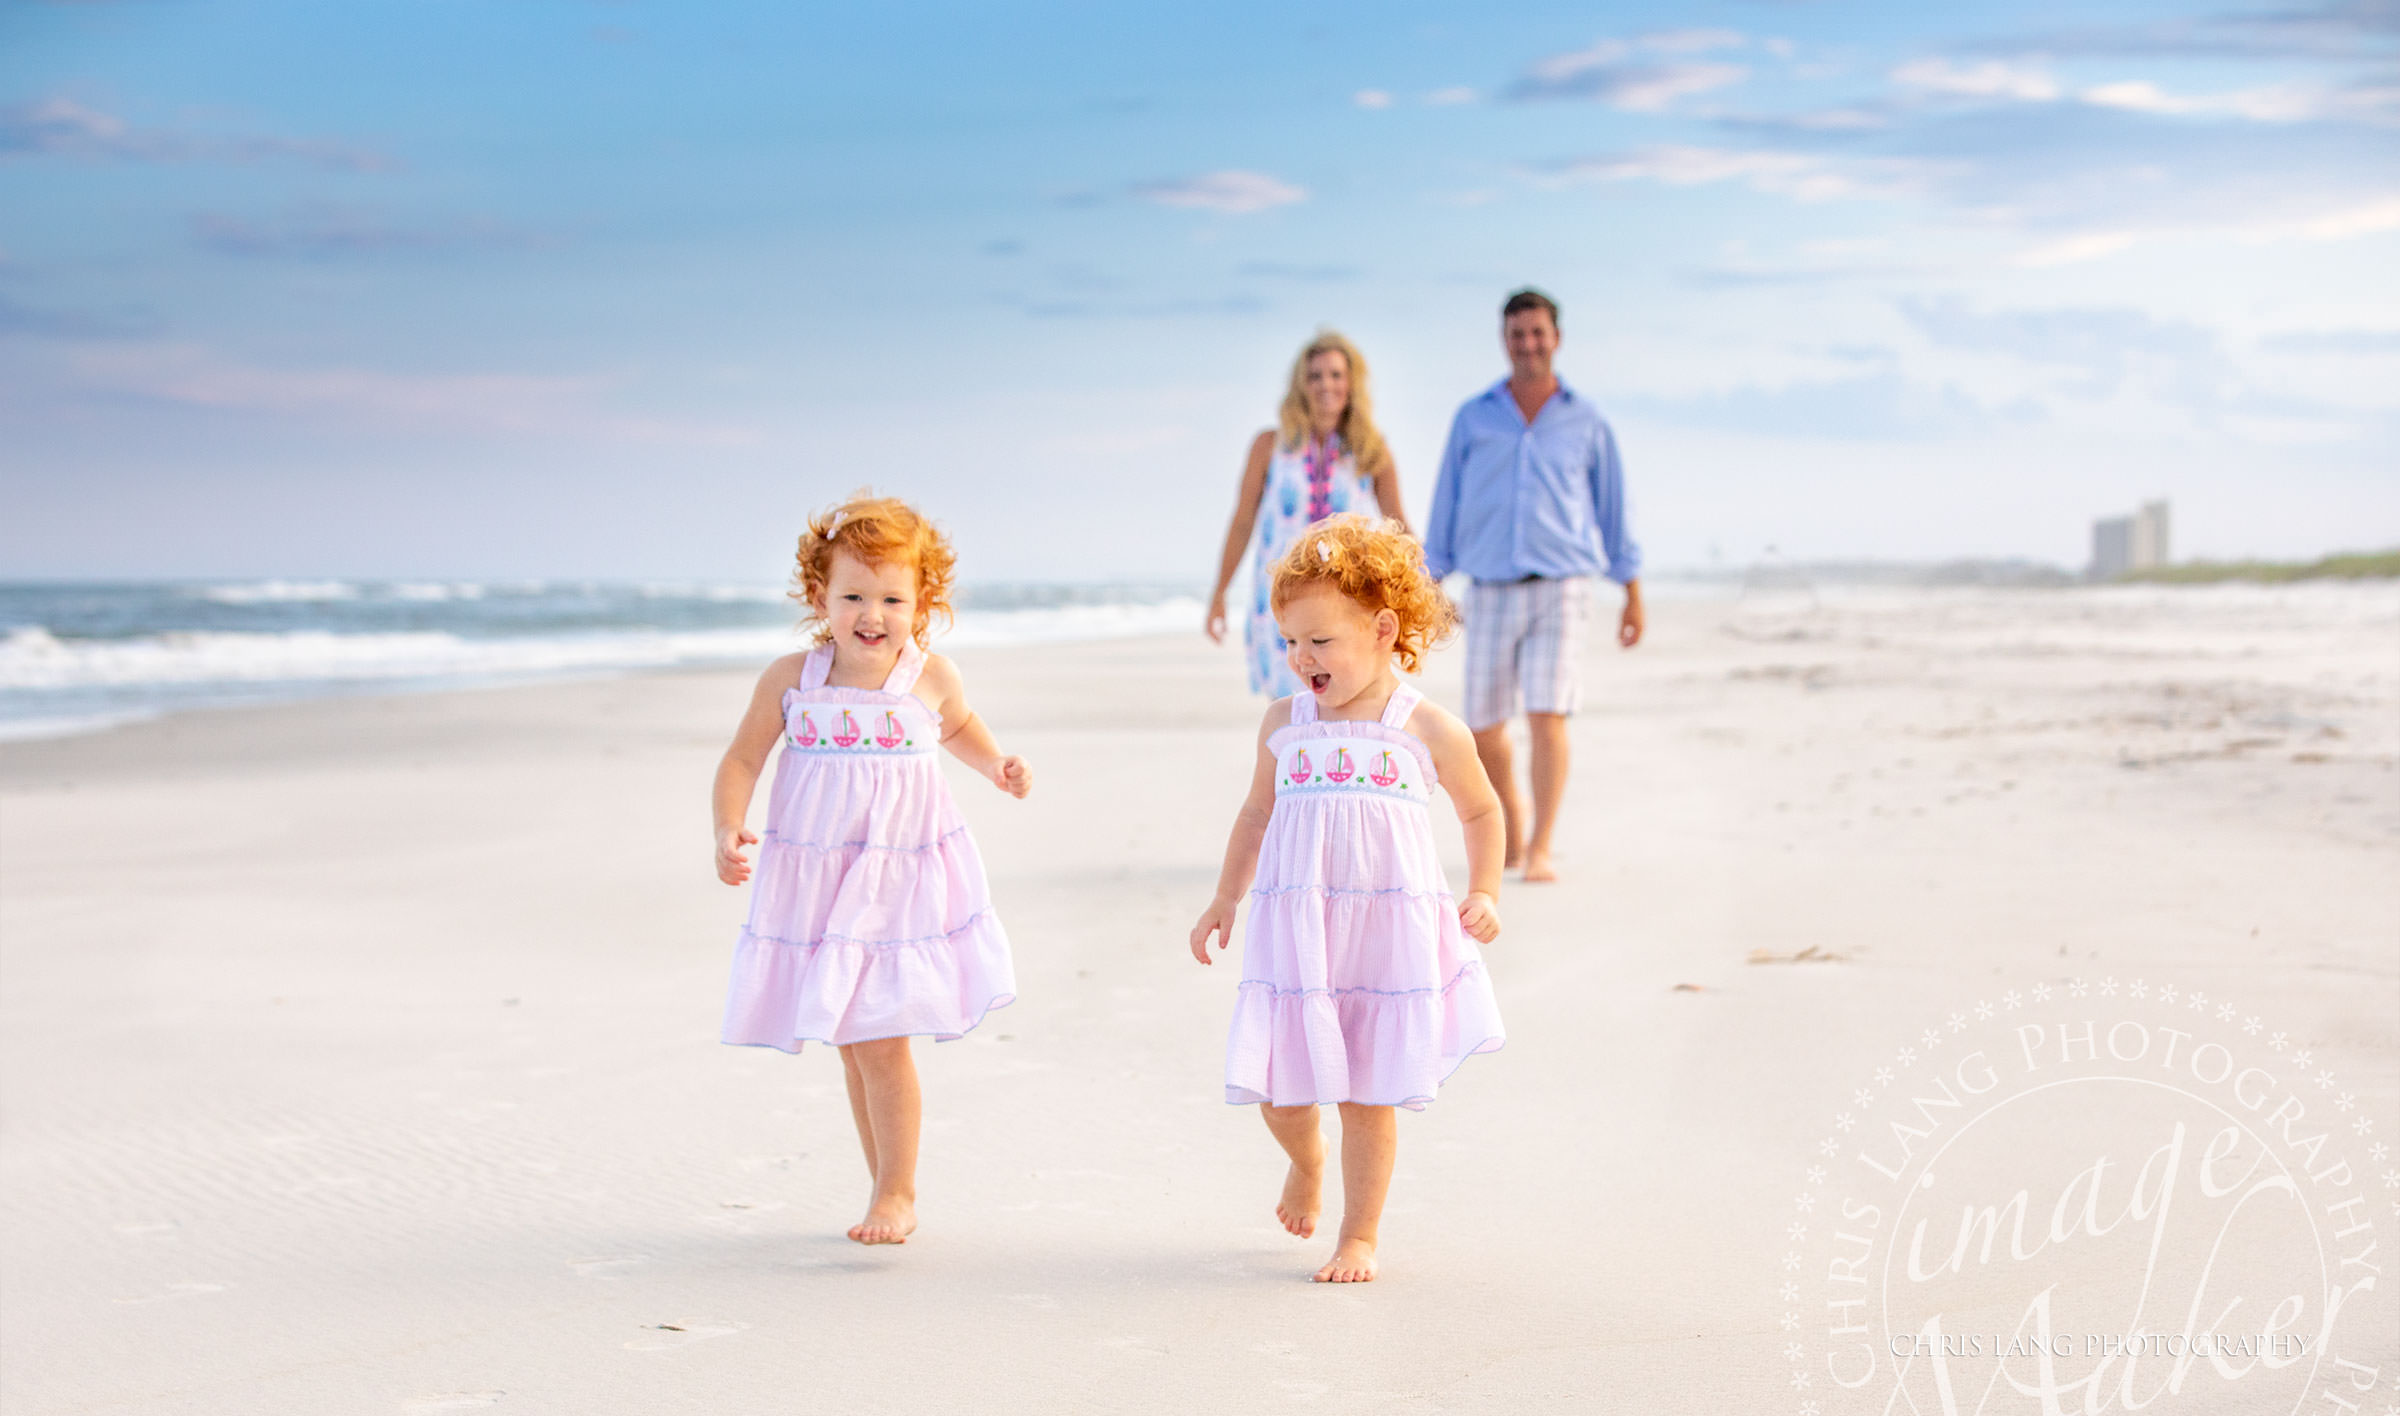 Two little girls in pink dresses on the beach - Figure Eight Island Photography - Photographers - Figure 8 Island  - Photography Services - Chris Lang Photography - 